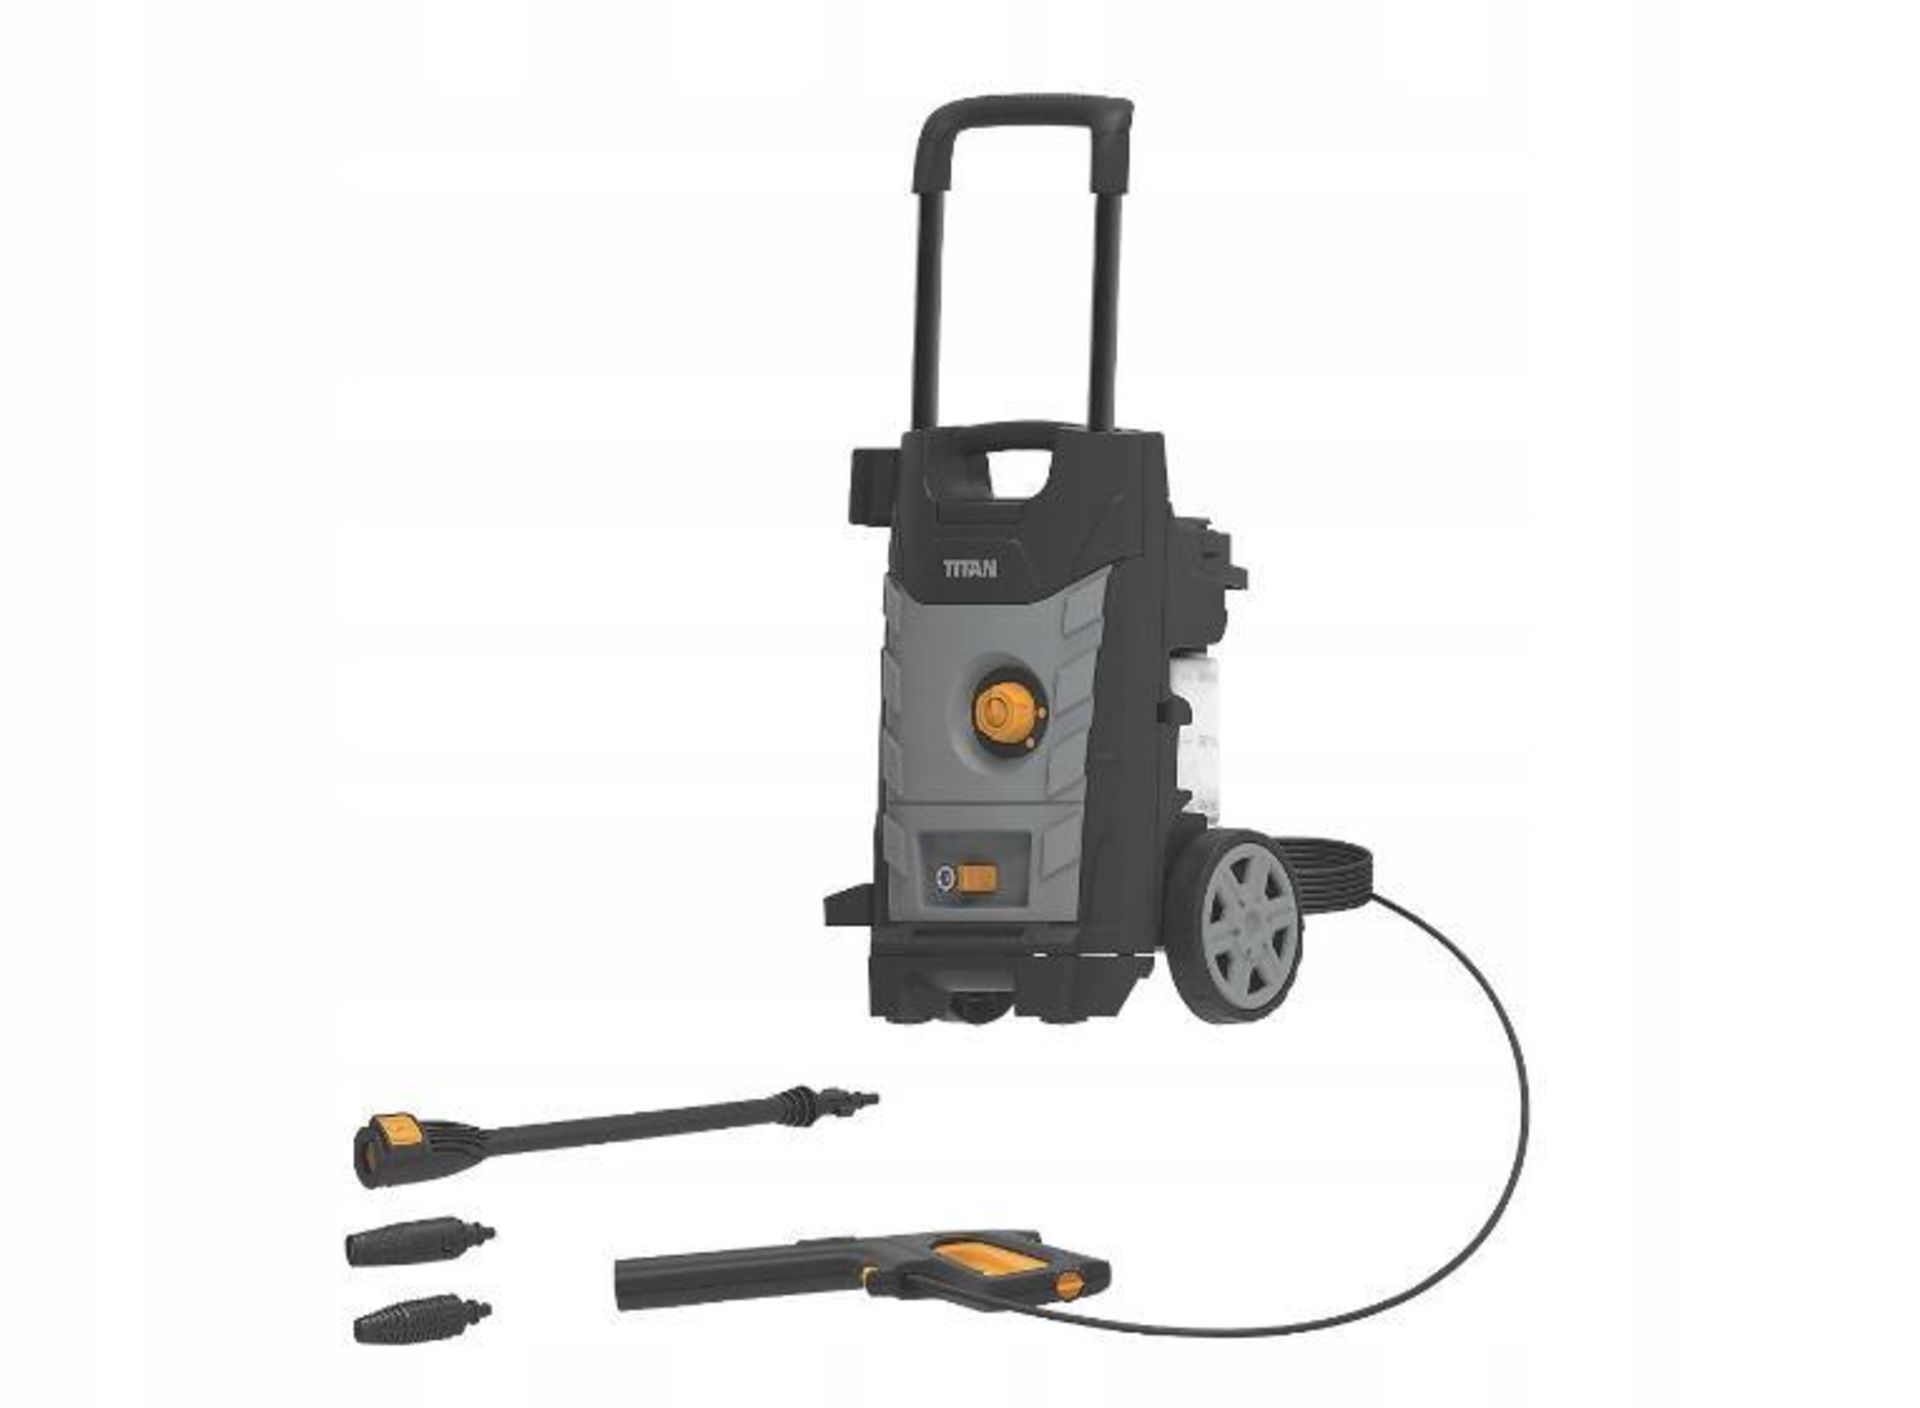 Titan 140 Bar 1800 W Pressure Washer (LOCATION – H/S R 3.4) Compact washer with space-saving